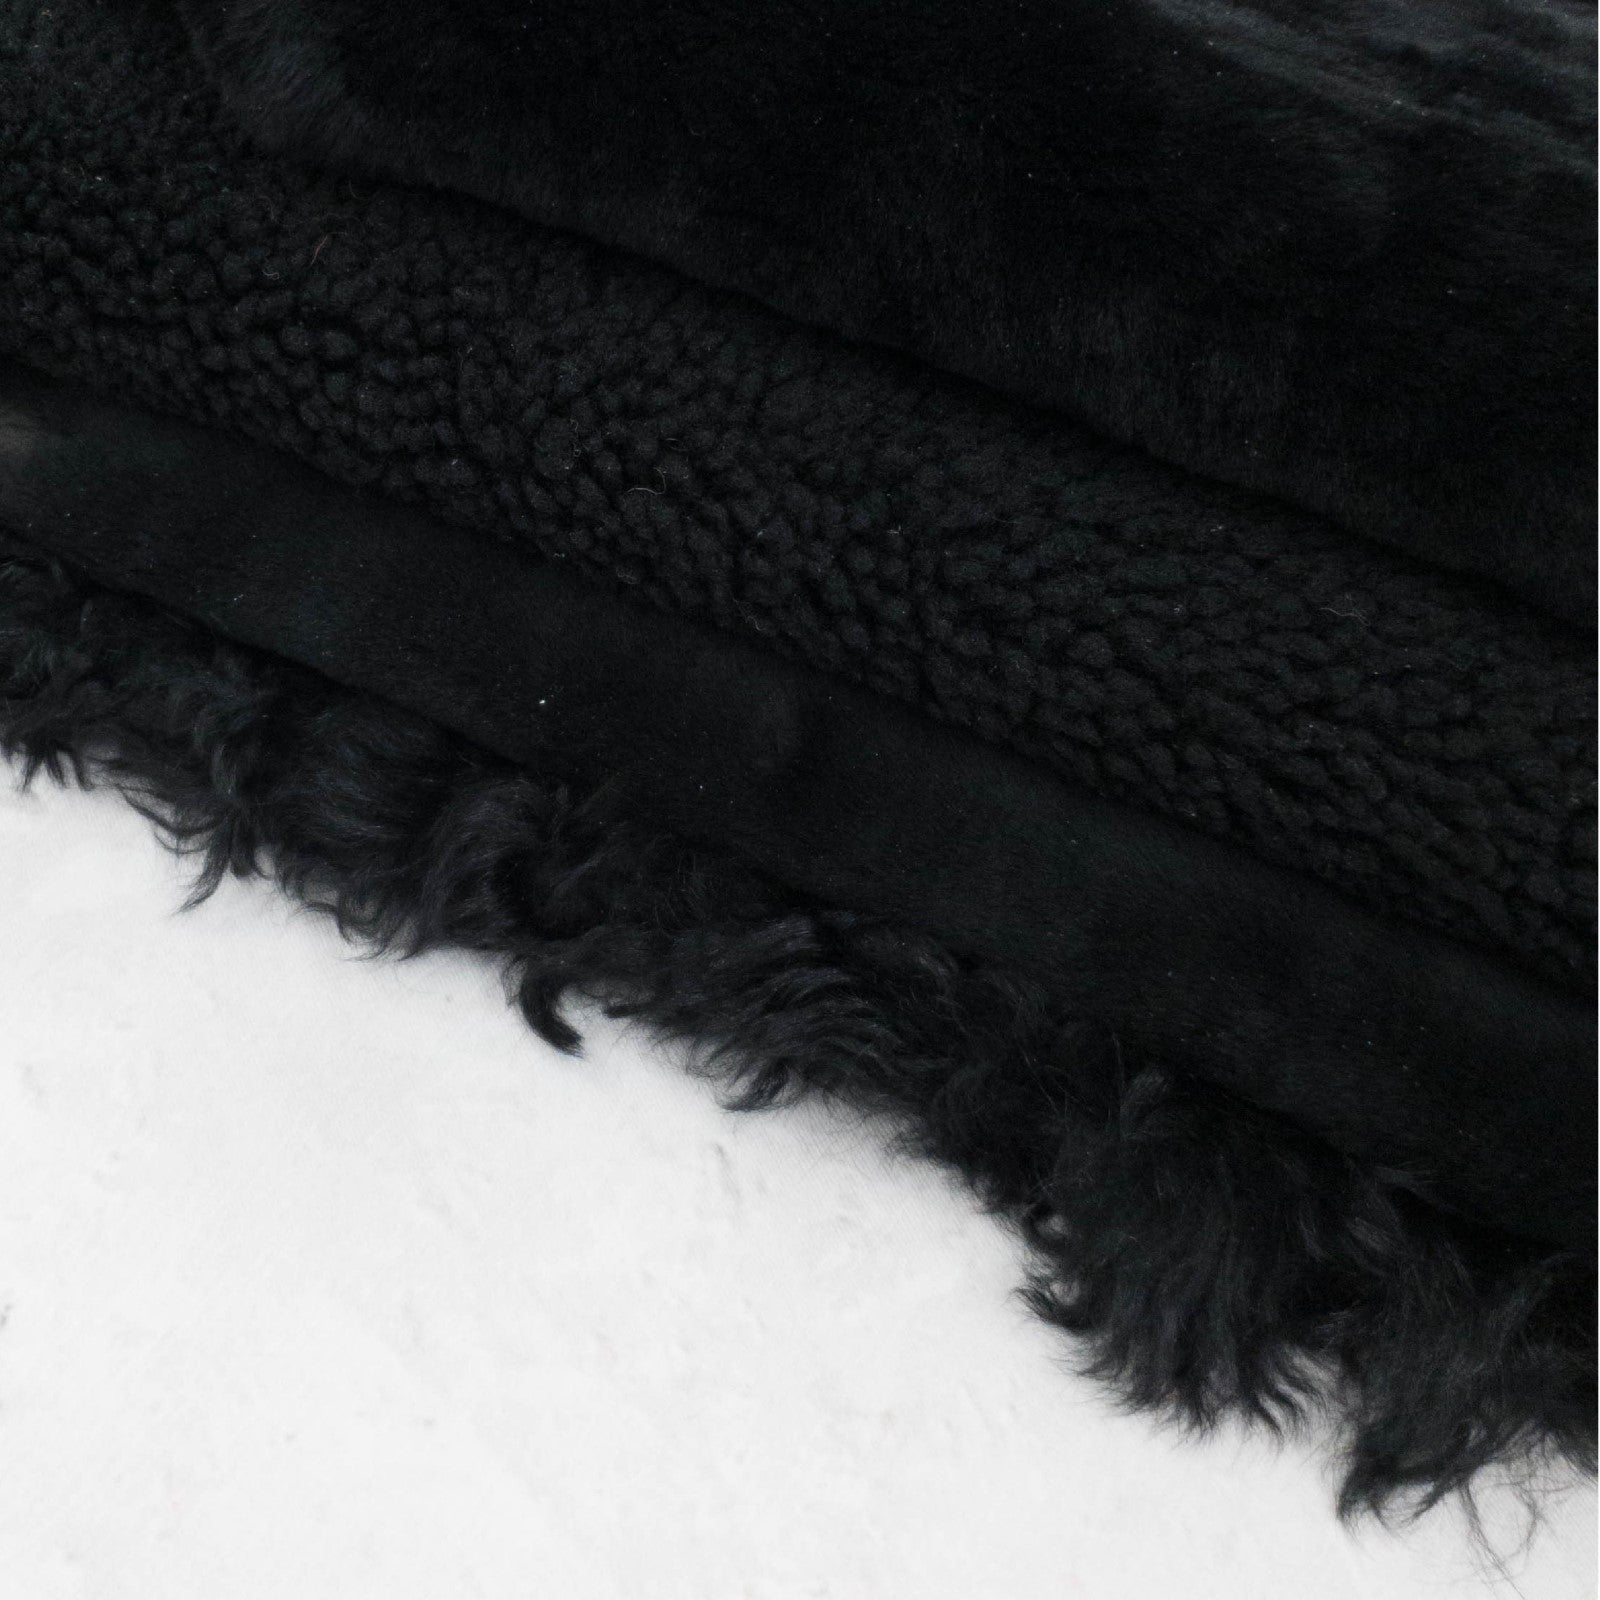 Black, 1-3+ Sq Ft, Sheepskin Shearling Hides,  | The Leather Guy